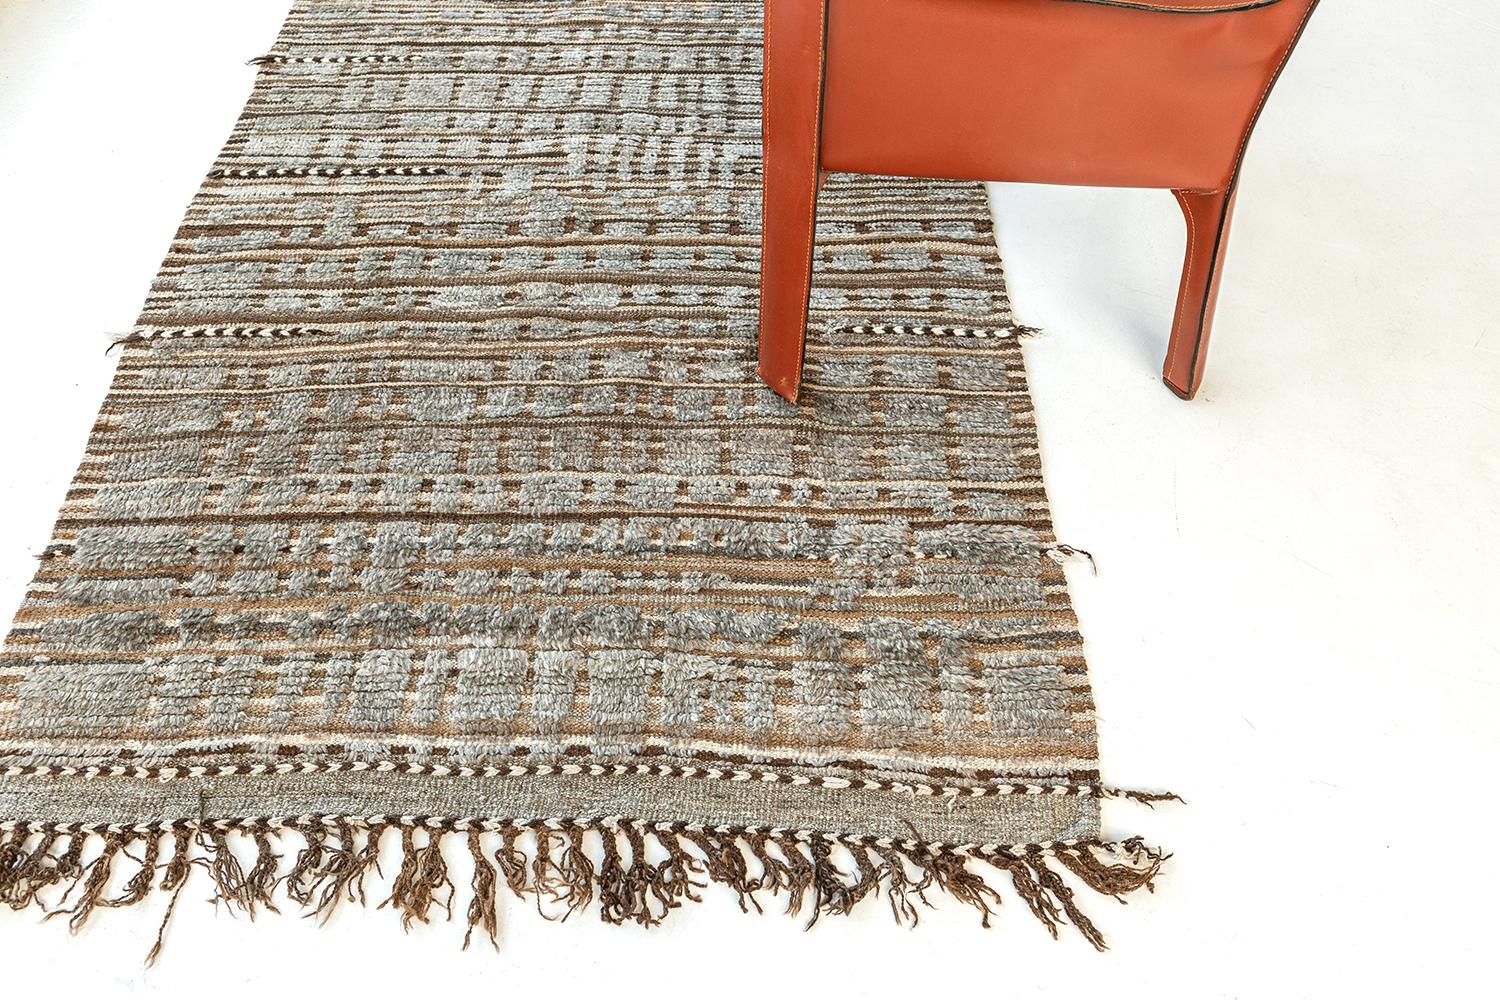 This gorgeous Salsola rug is a hand-knotted weave of embossed wool. Inspired by elements of traditional textile design from Central Asia, our Atlas Collection offers a variety of linear patterns. Common color schemes include brown and silver